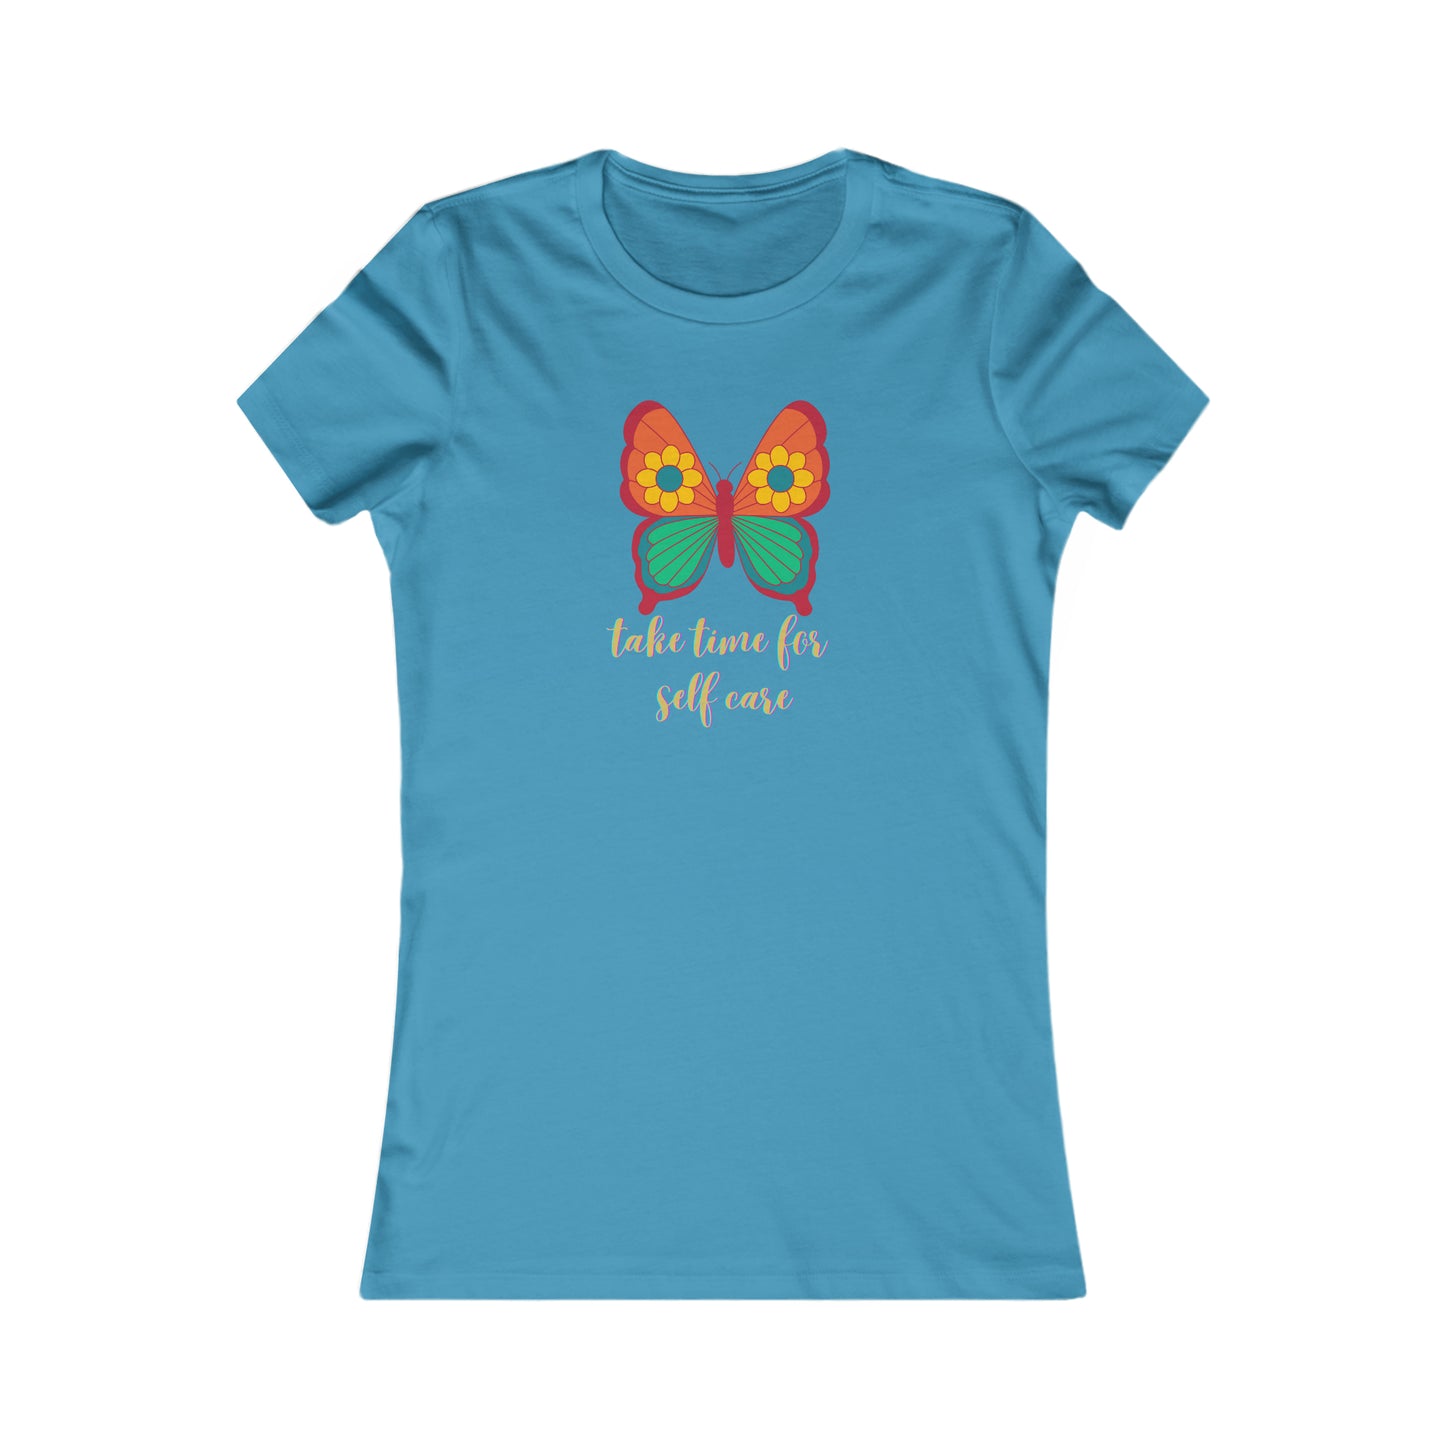 Go ahead and “take time for self care” message on this Women's Favorite Tee design. We all need it for health and wellness. Slim fit so please check the size table.